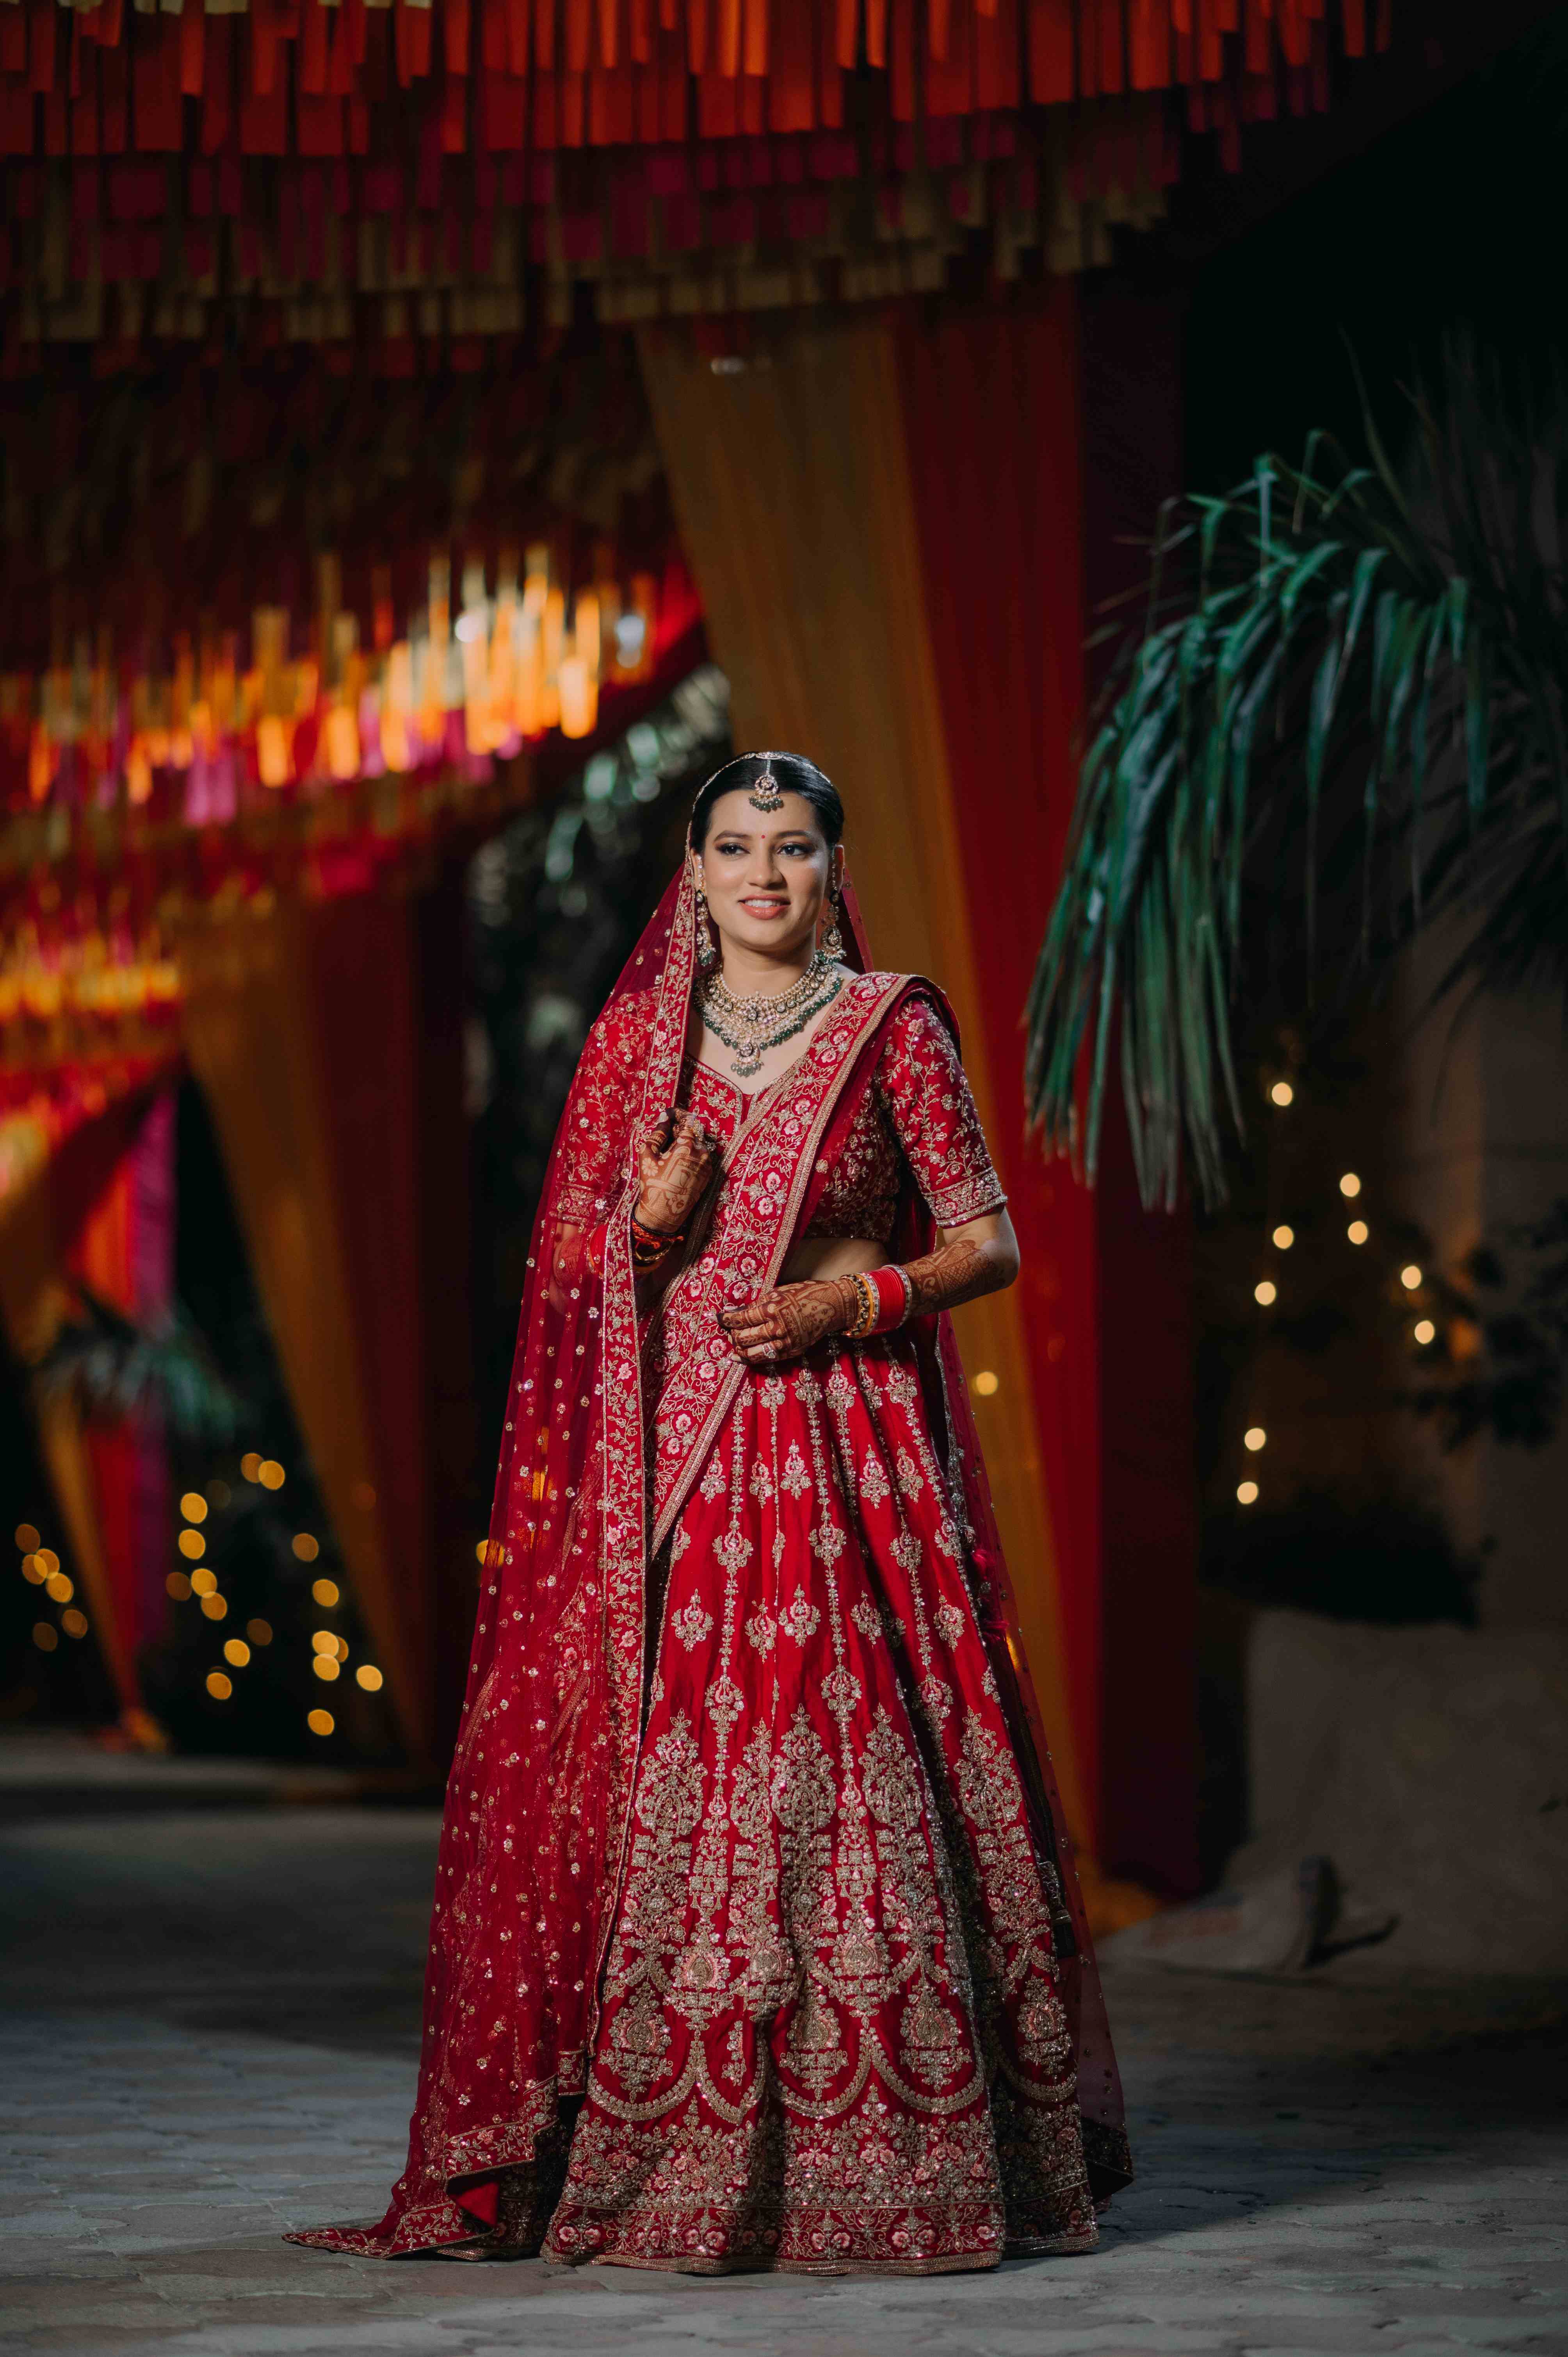 121 Couture Ensured This Bride Looks Like A Million Bucks On Her D-Day!